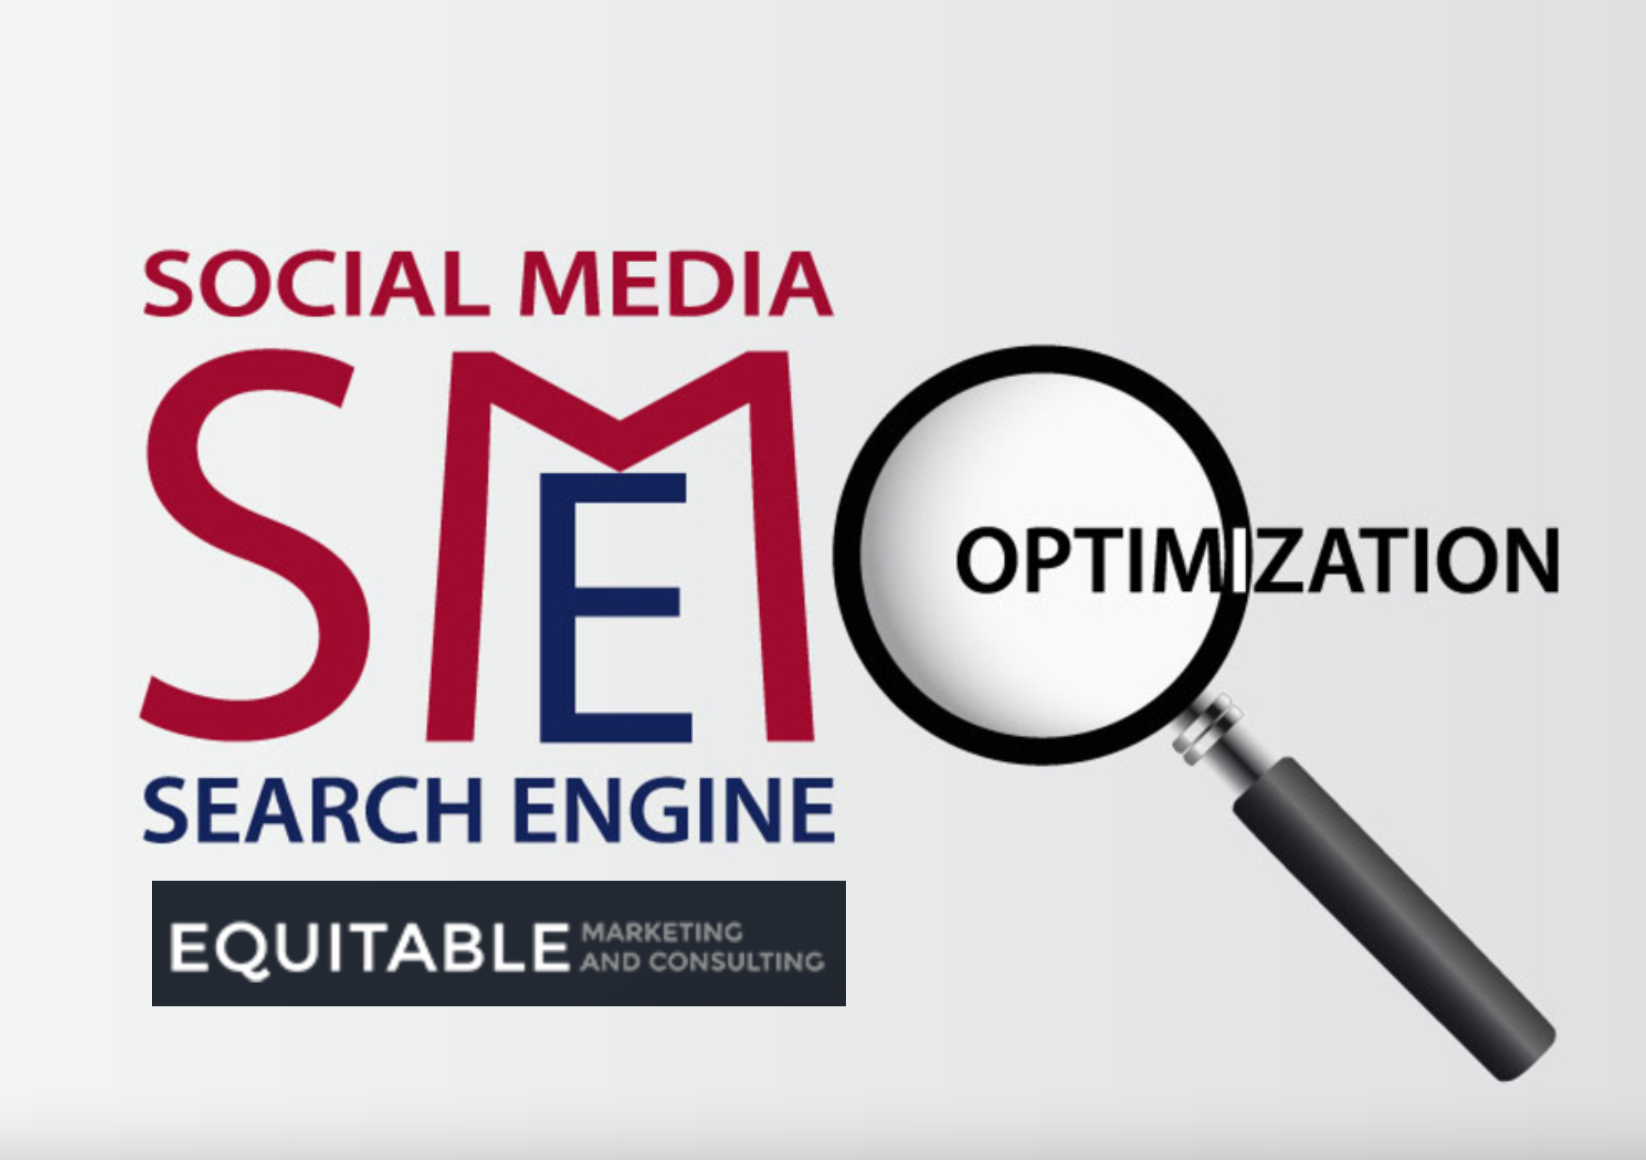 Equitable Marketing on their Social Media Marketing and Search Engine Optimization services.